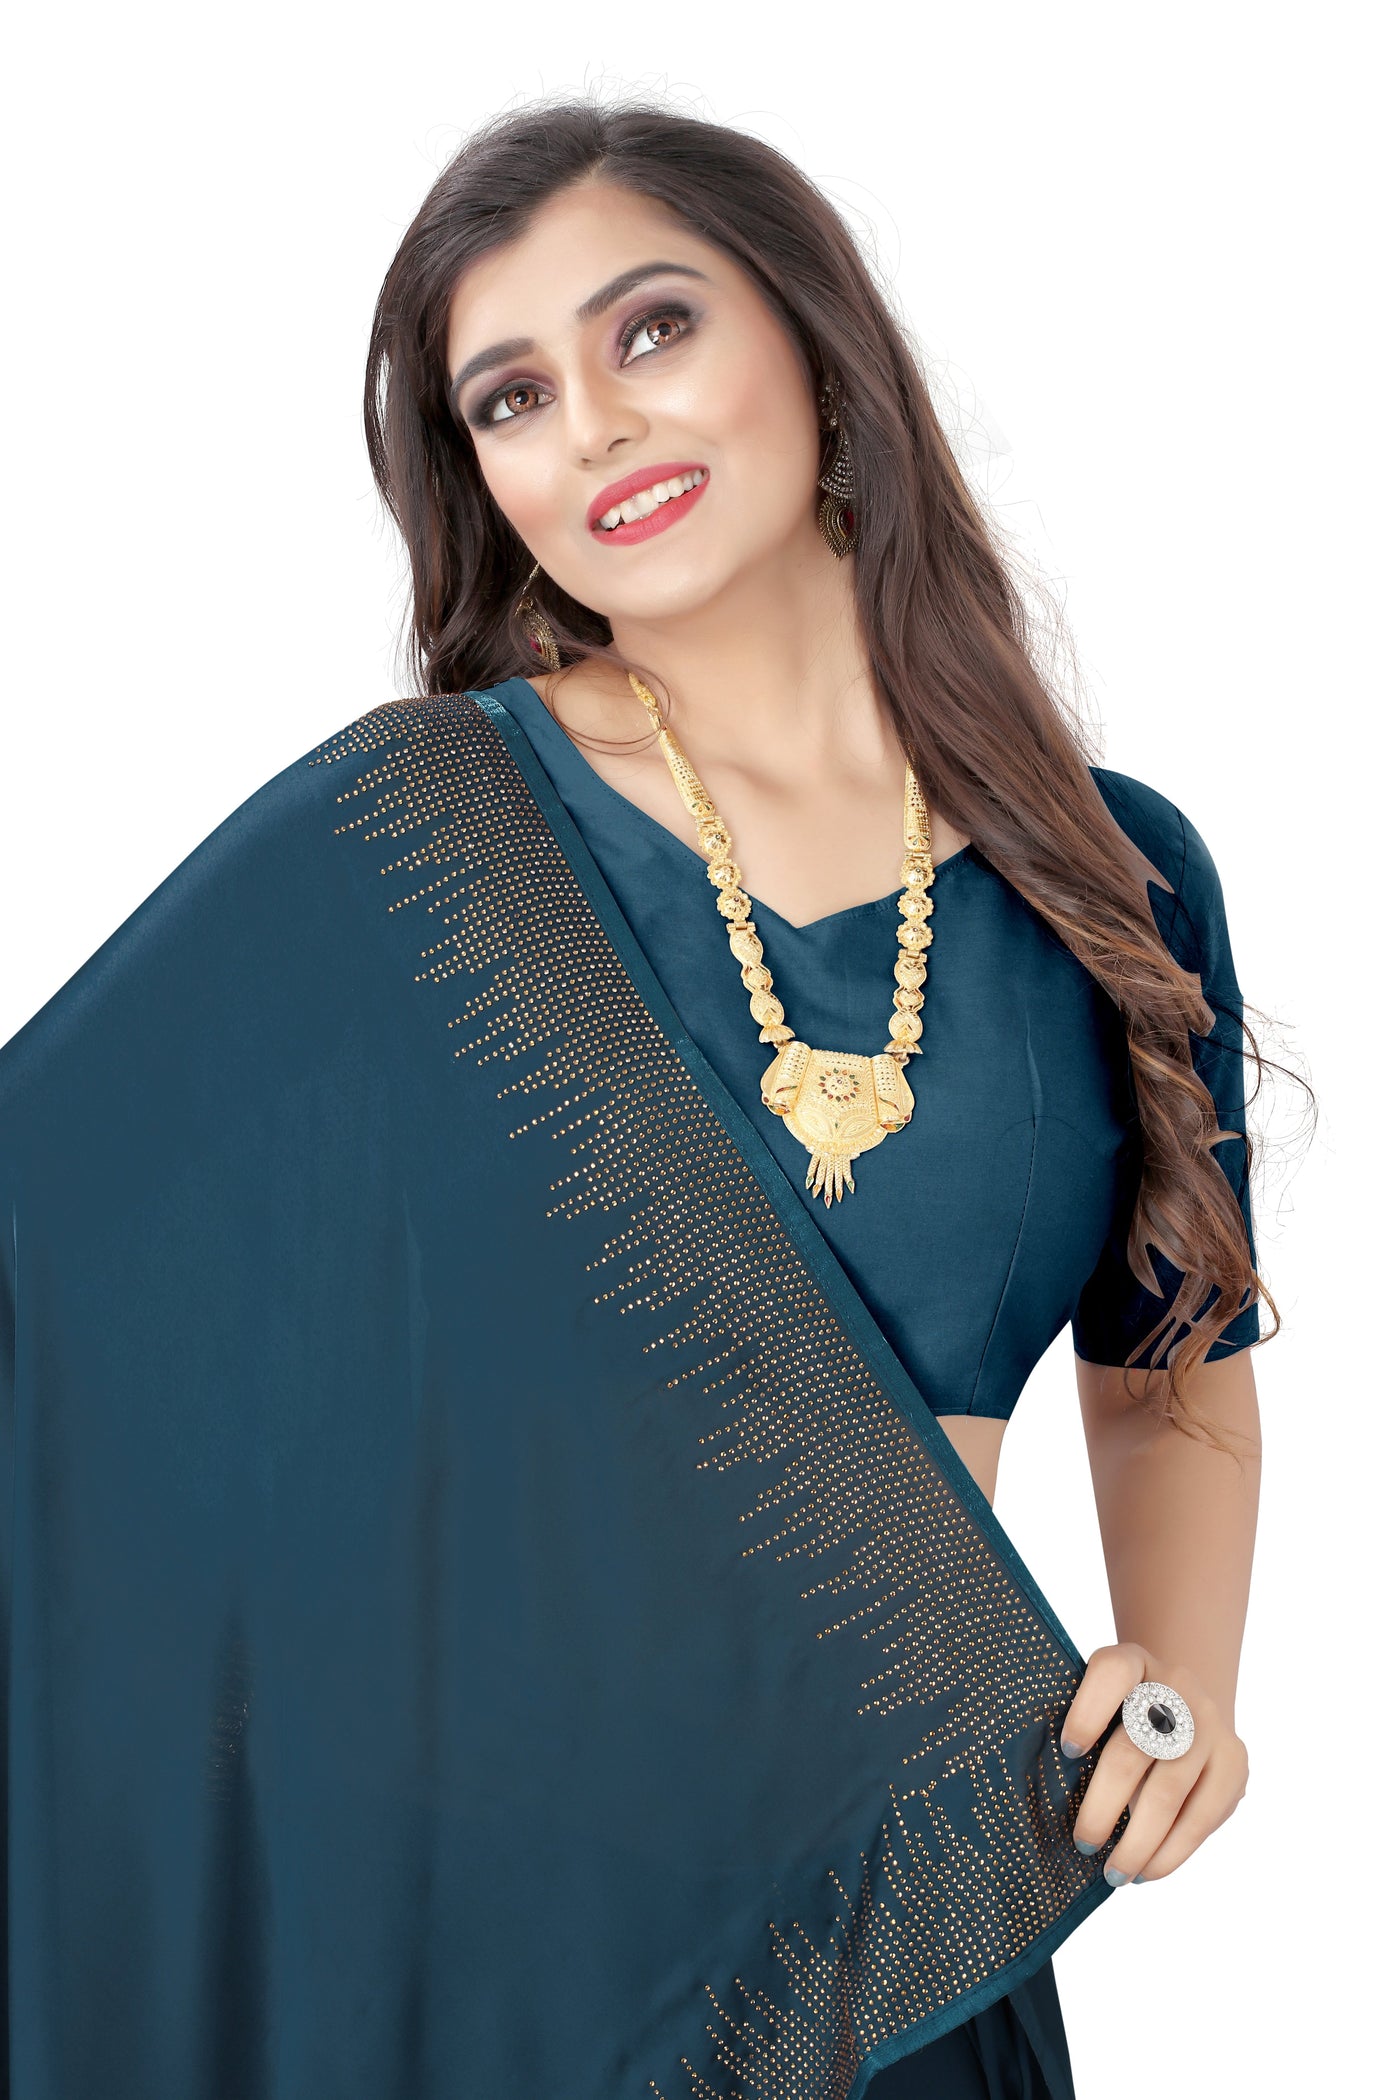 Pure Satin Peacock Blue Saree With Blouse